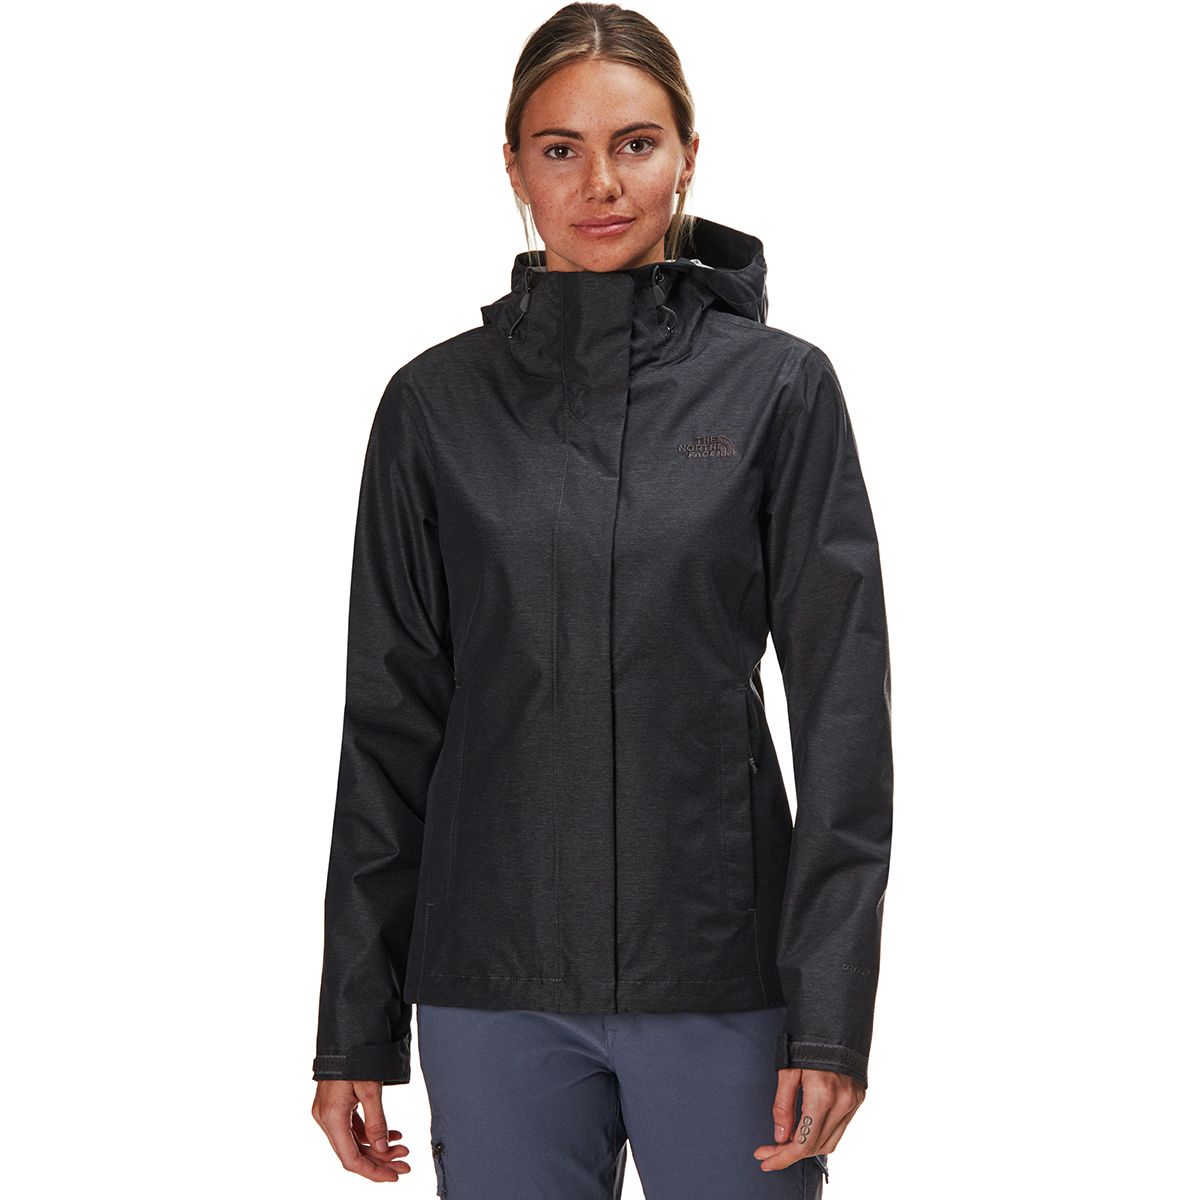 The North Face Venture 2 Jacket - Women's | Backcountry.com